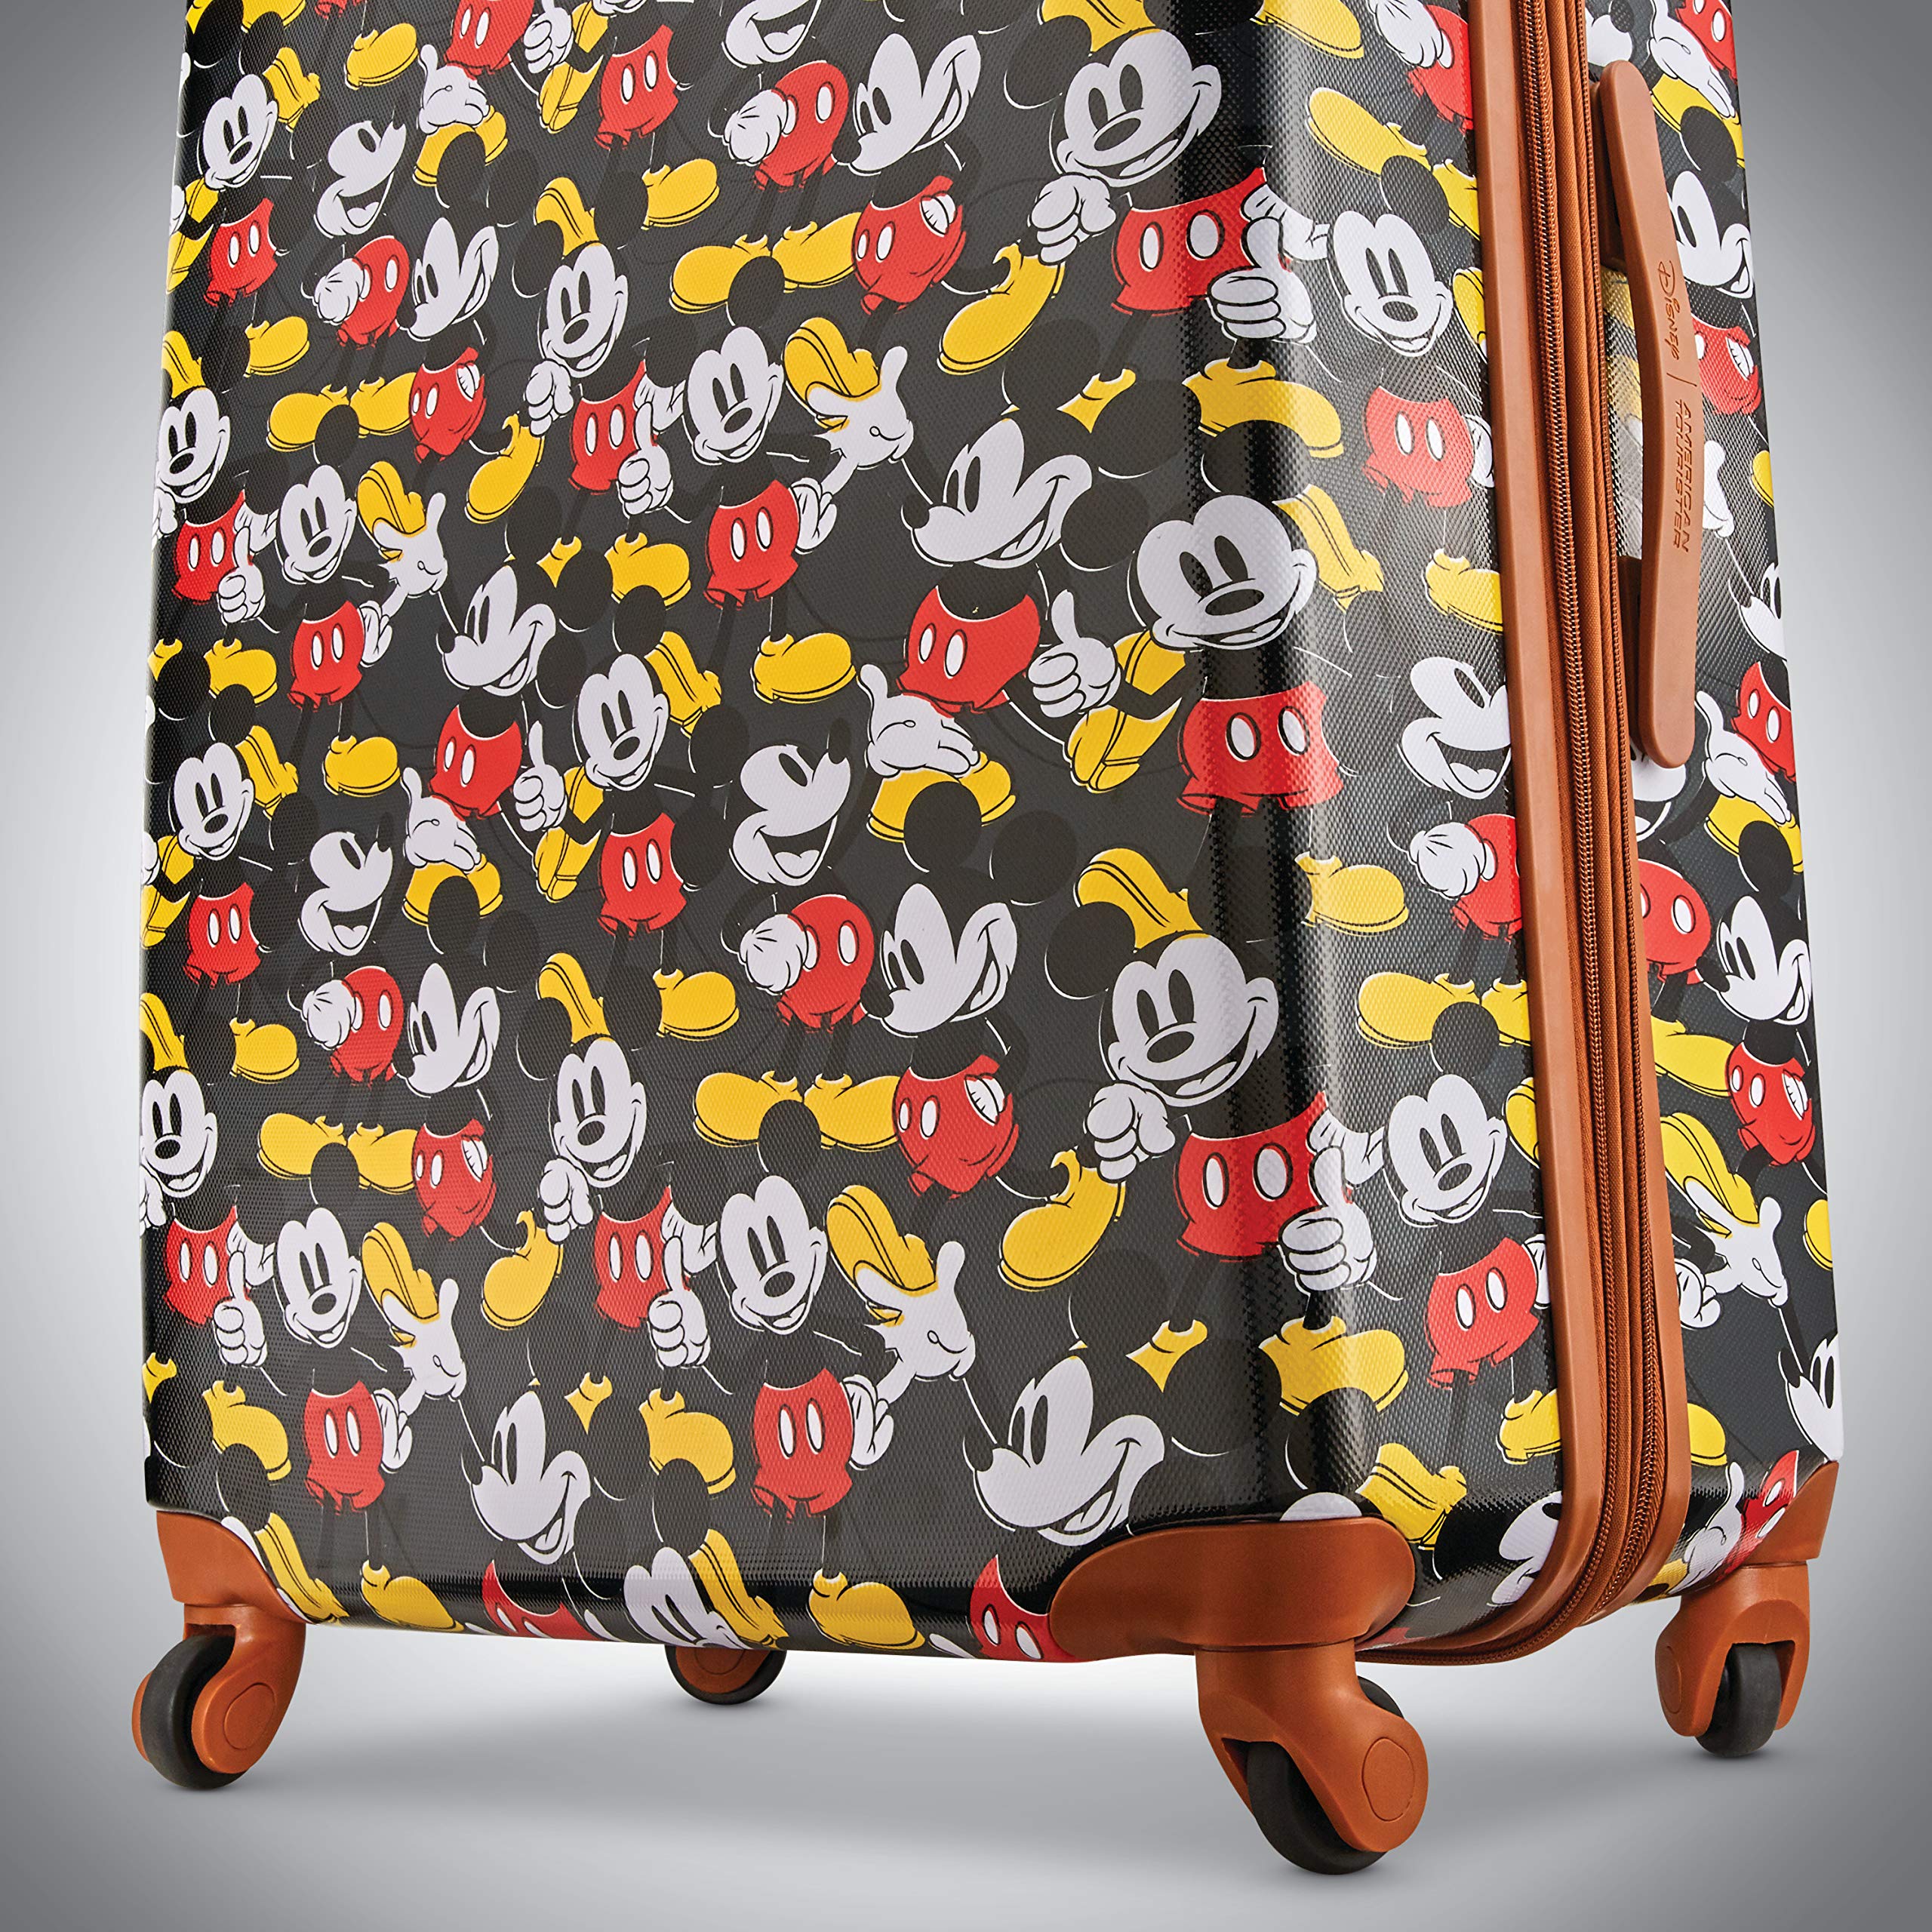 AMERICAN TOURISTER Disney Hardside Luggage with Spinner Wheels, Multicolor, 28"